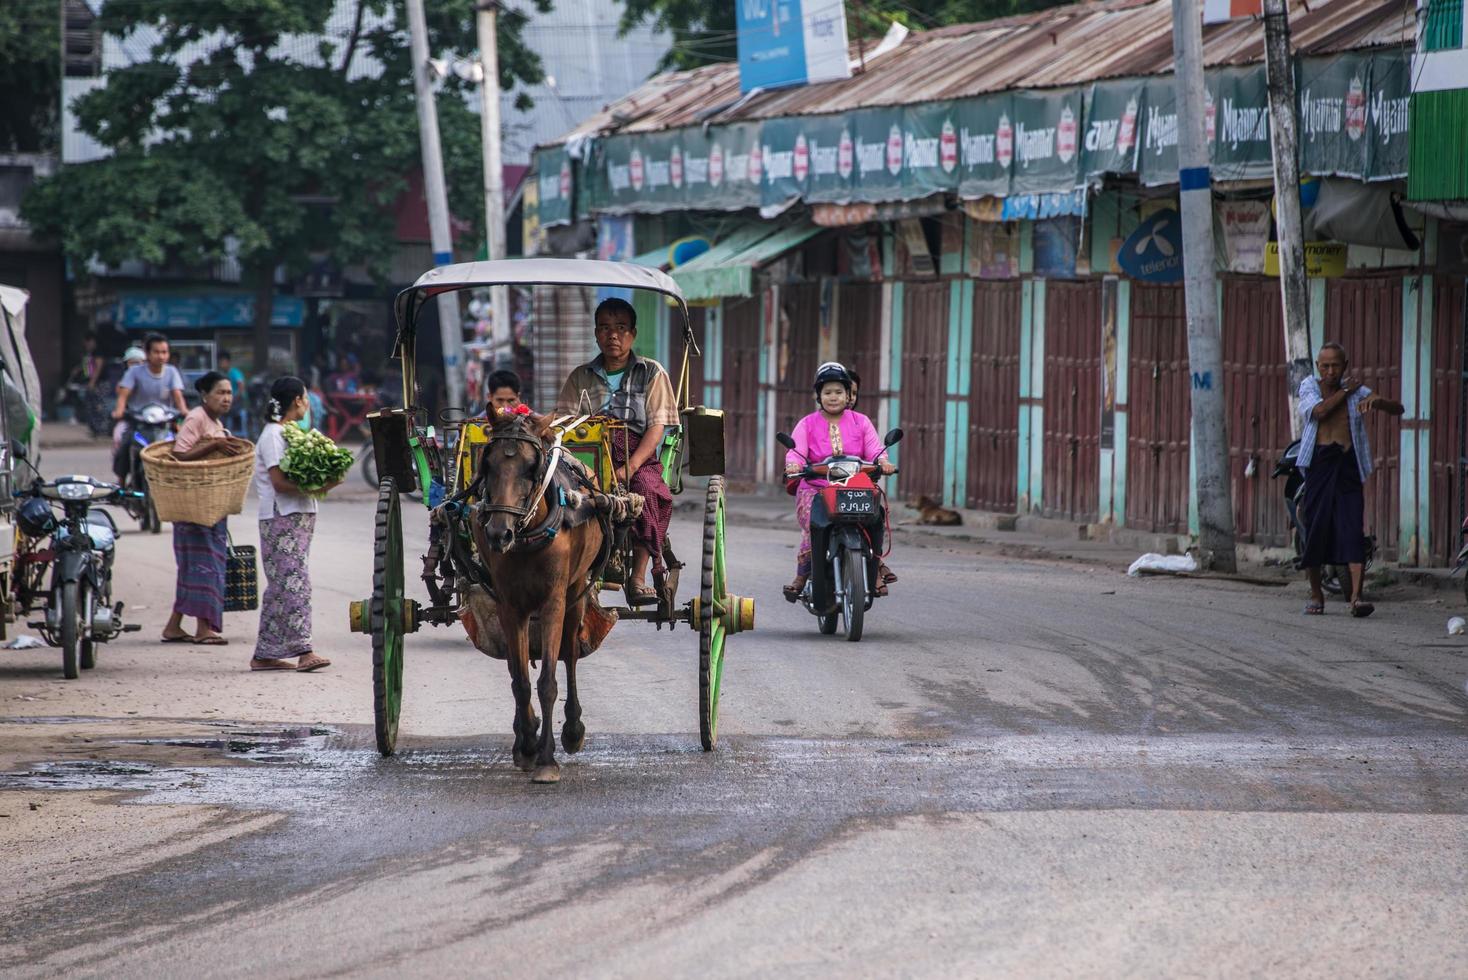 MANDALAY, MYANMAR - JUL 18, 2018-The way of people life in myanmar. The authentical culture of society. photo